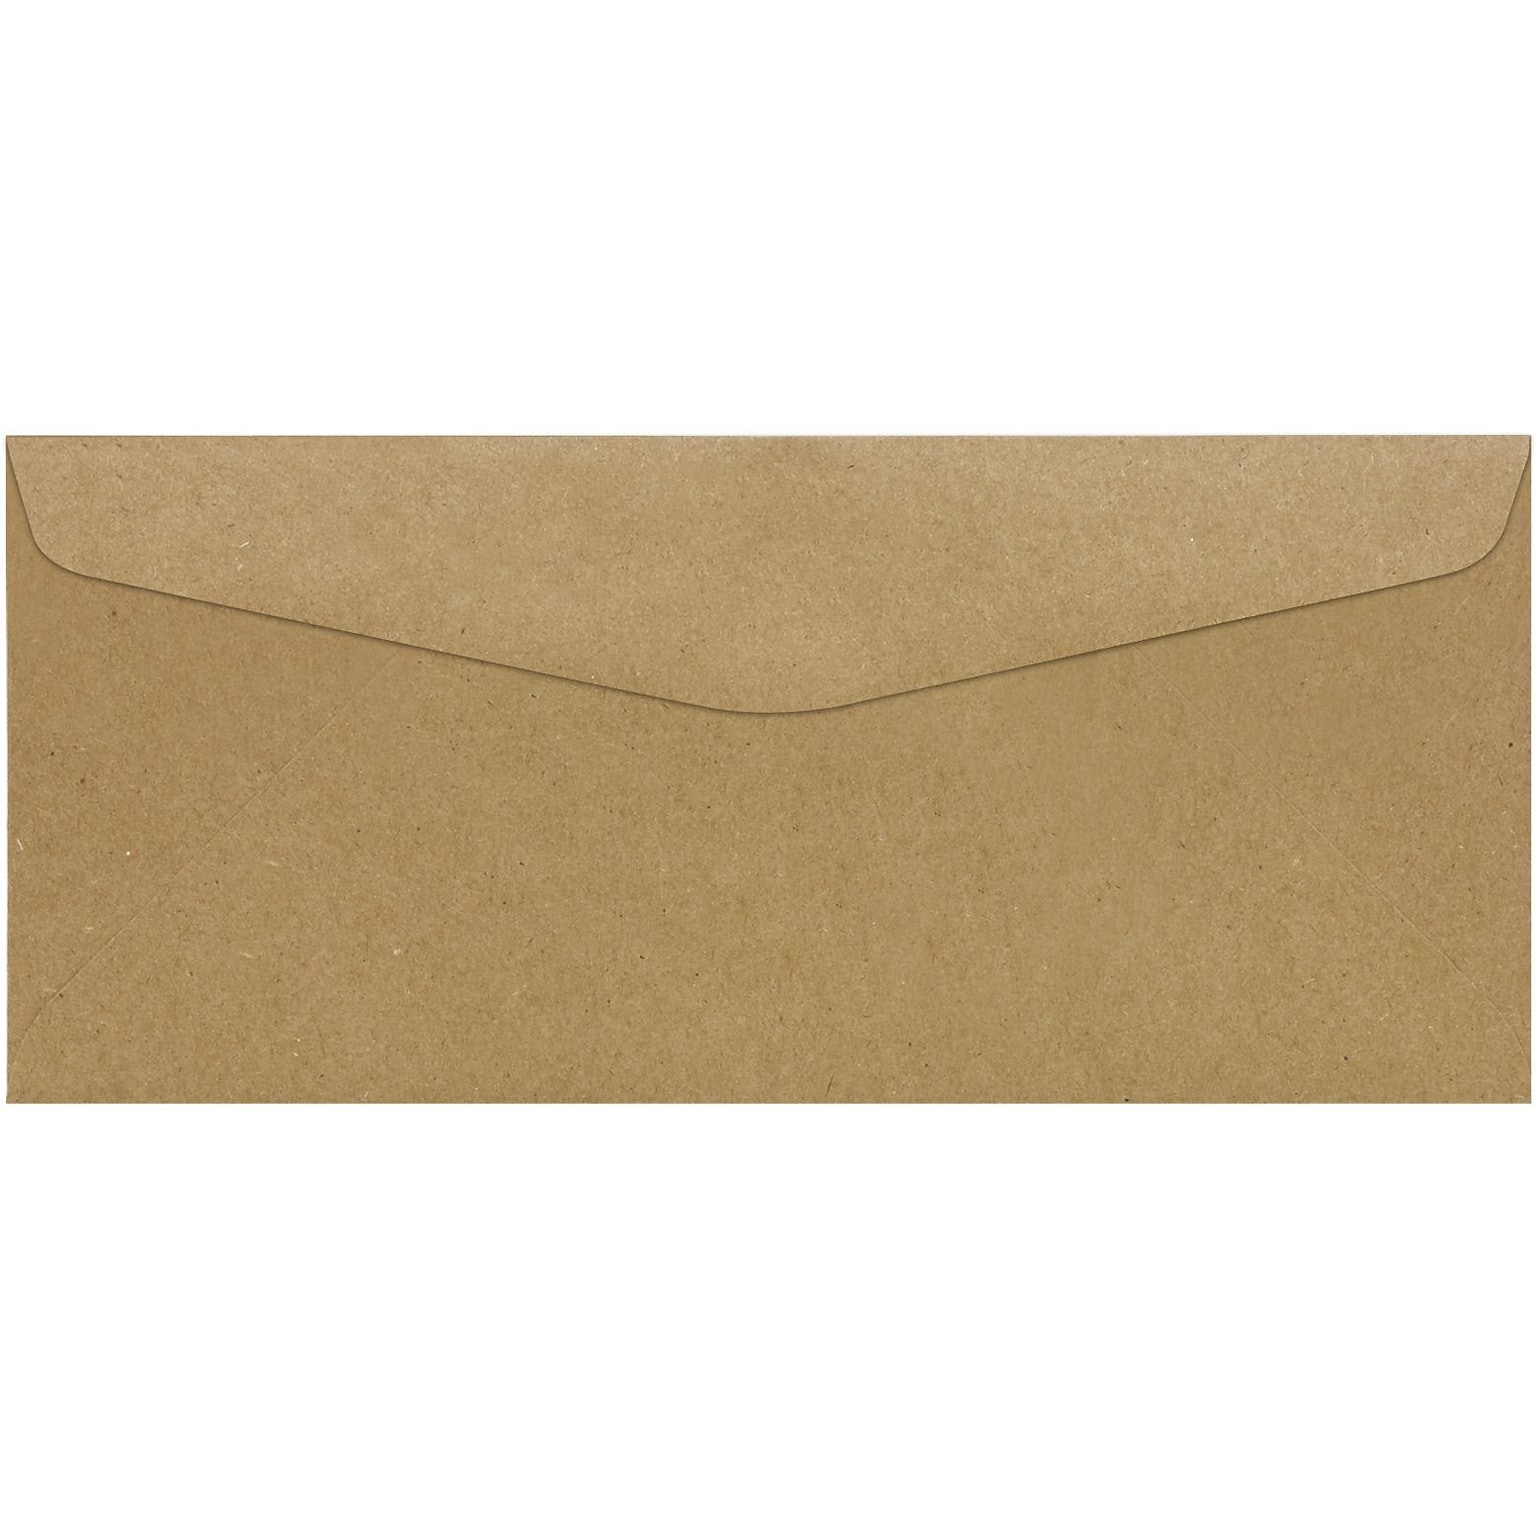 LUX Moistenable Glue #10 Business Envelope, 4 1/2 x 9 1/2, Grocery Bag Brown, 50/Pack (4260-GB-50)